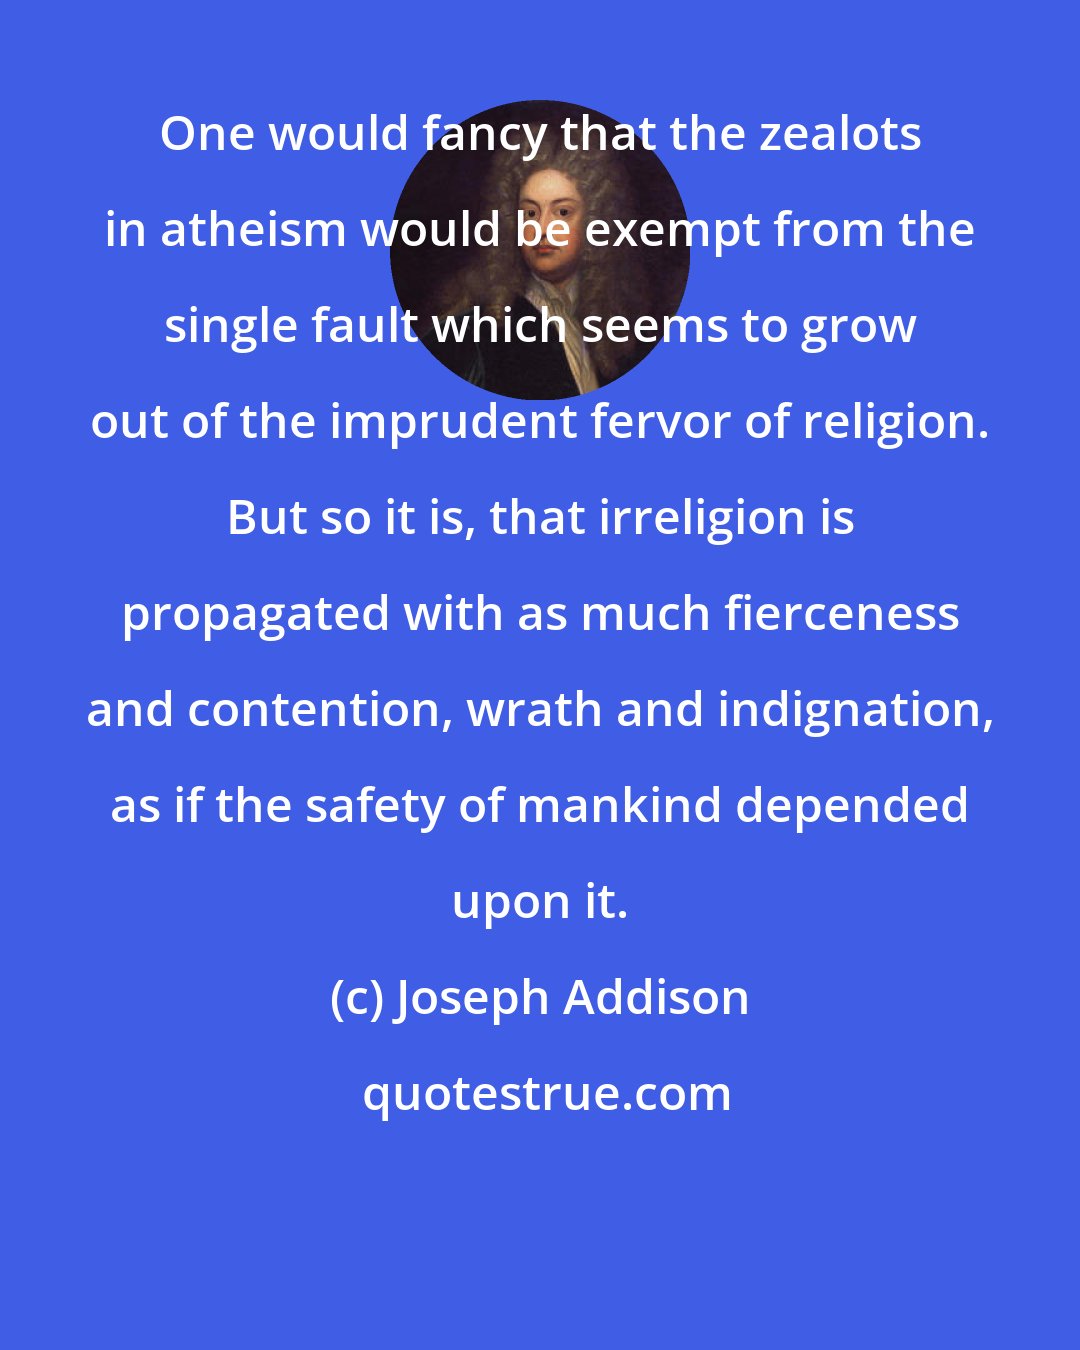 Joseph Addison: One would fancy that the zealots in atheism would be exempt from the single fault which seems to grow out of the imprudent fervor of religion. But so it is, that irreligion is propagated with as much fierceness and contention, wrath and indignation, as if the safety of mankind depended upon it.